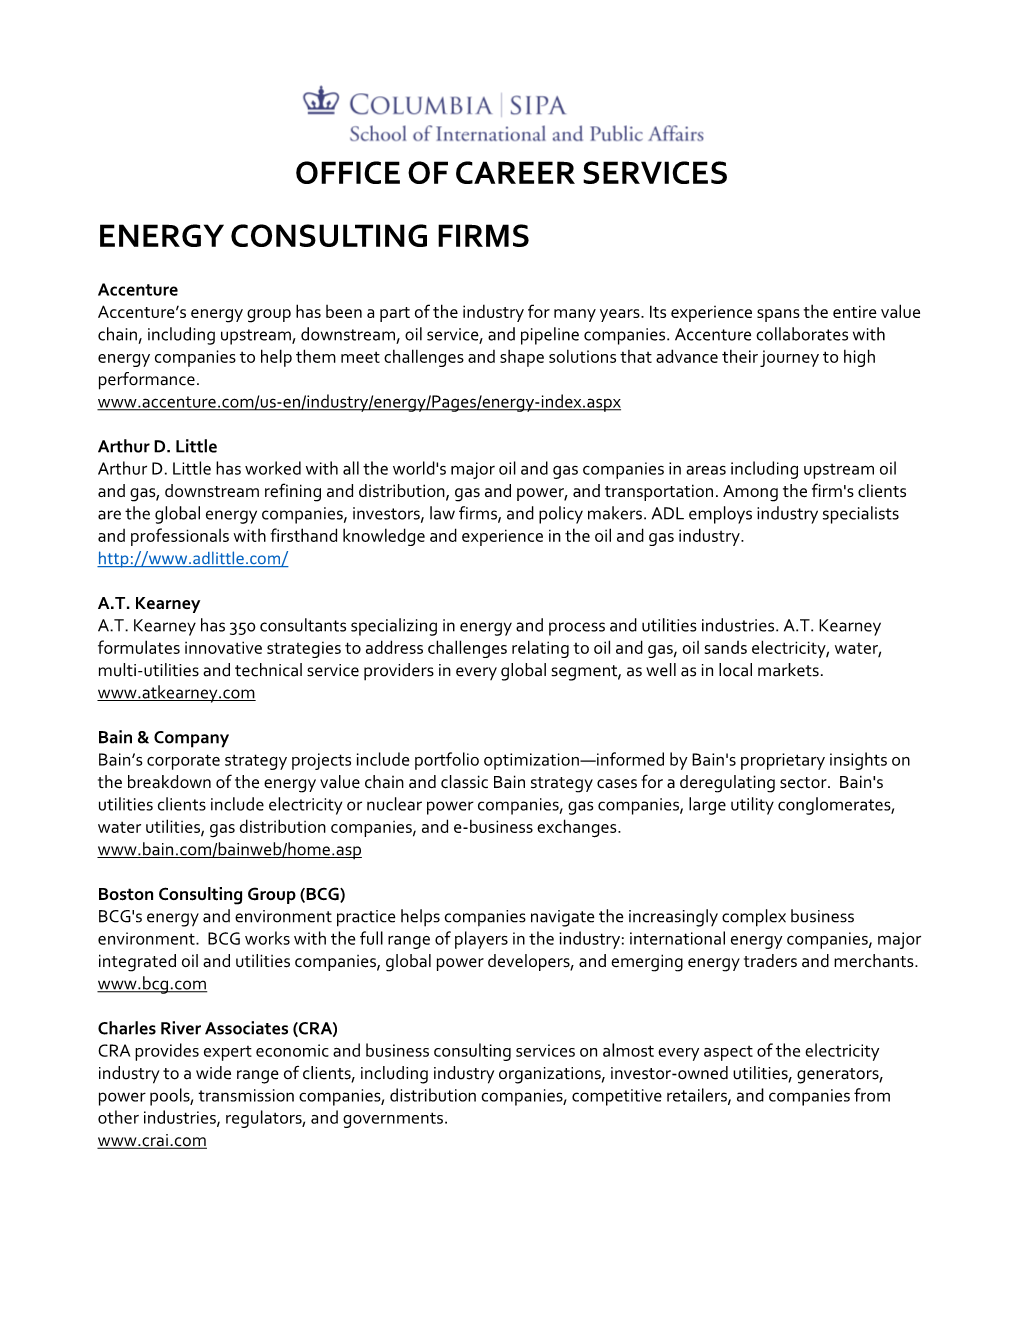 Energy Consulting Firms